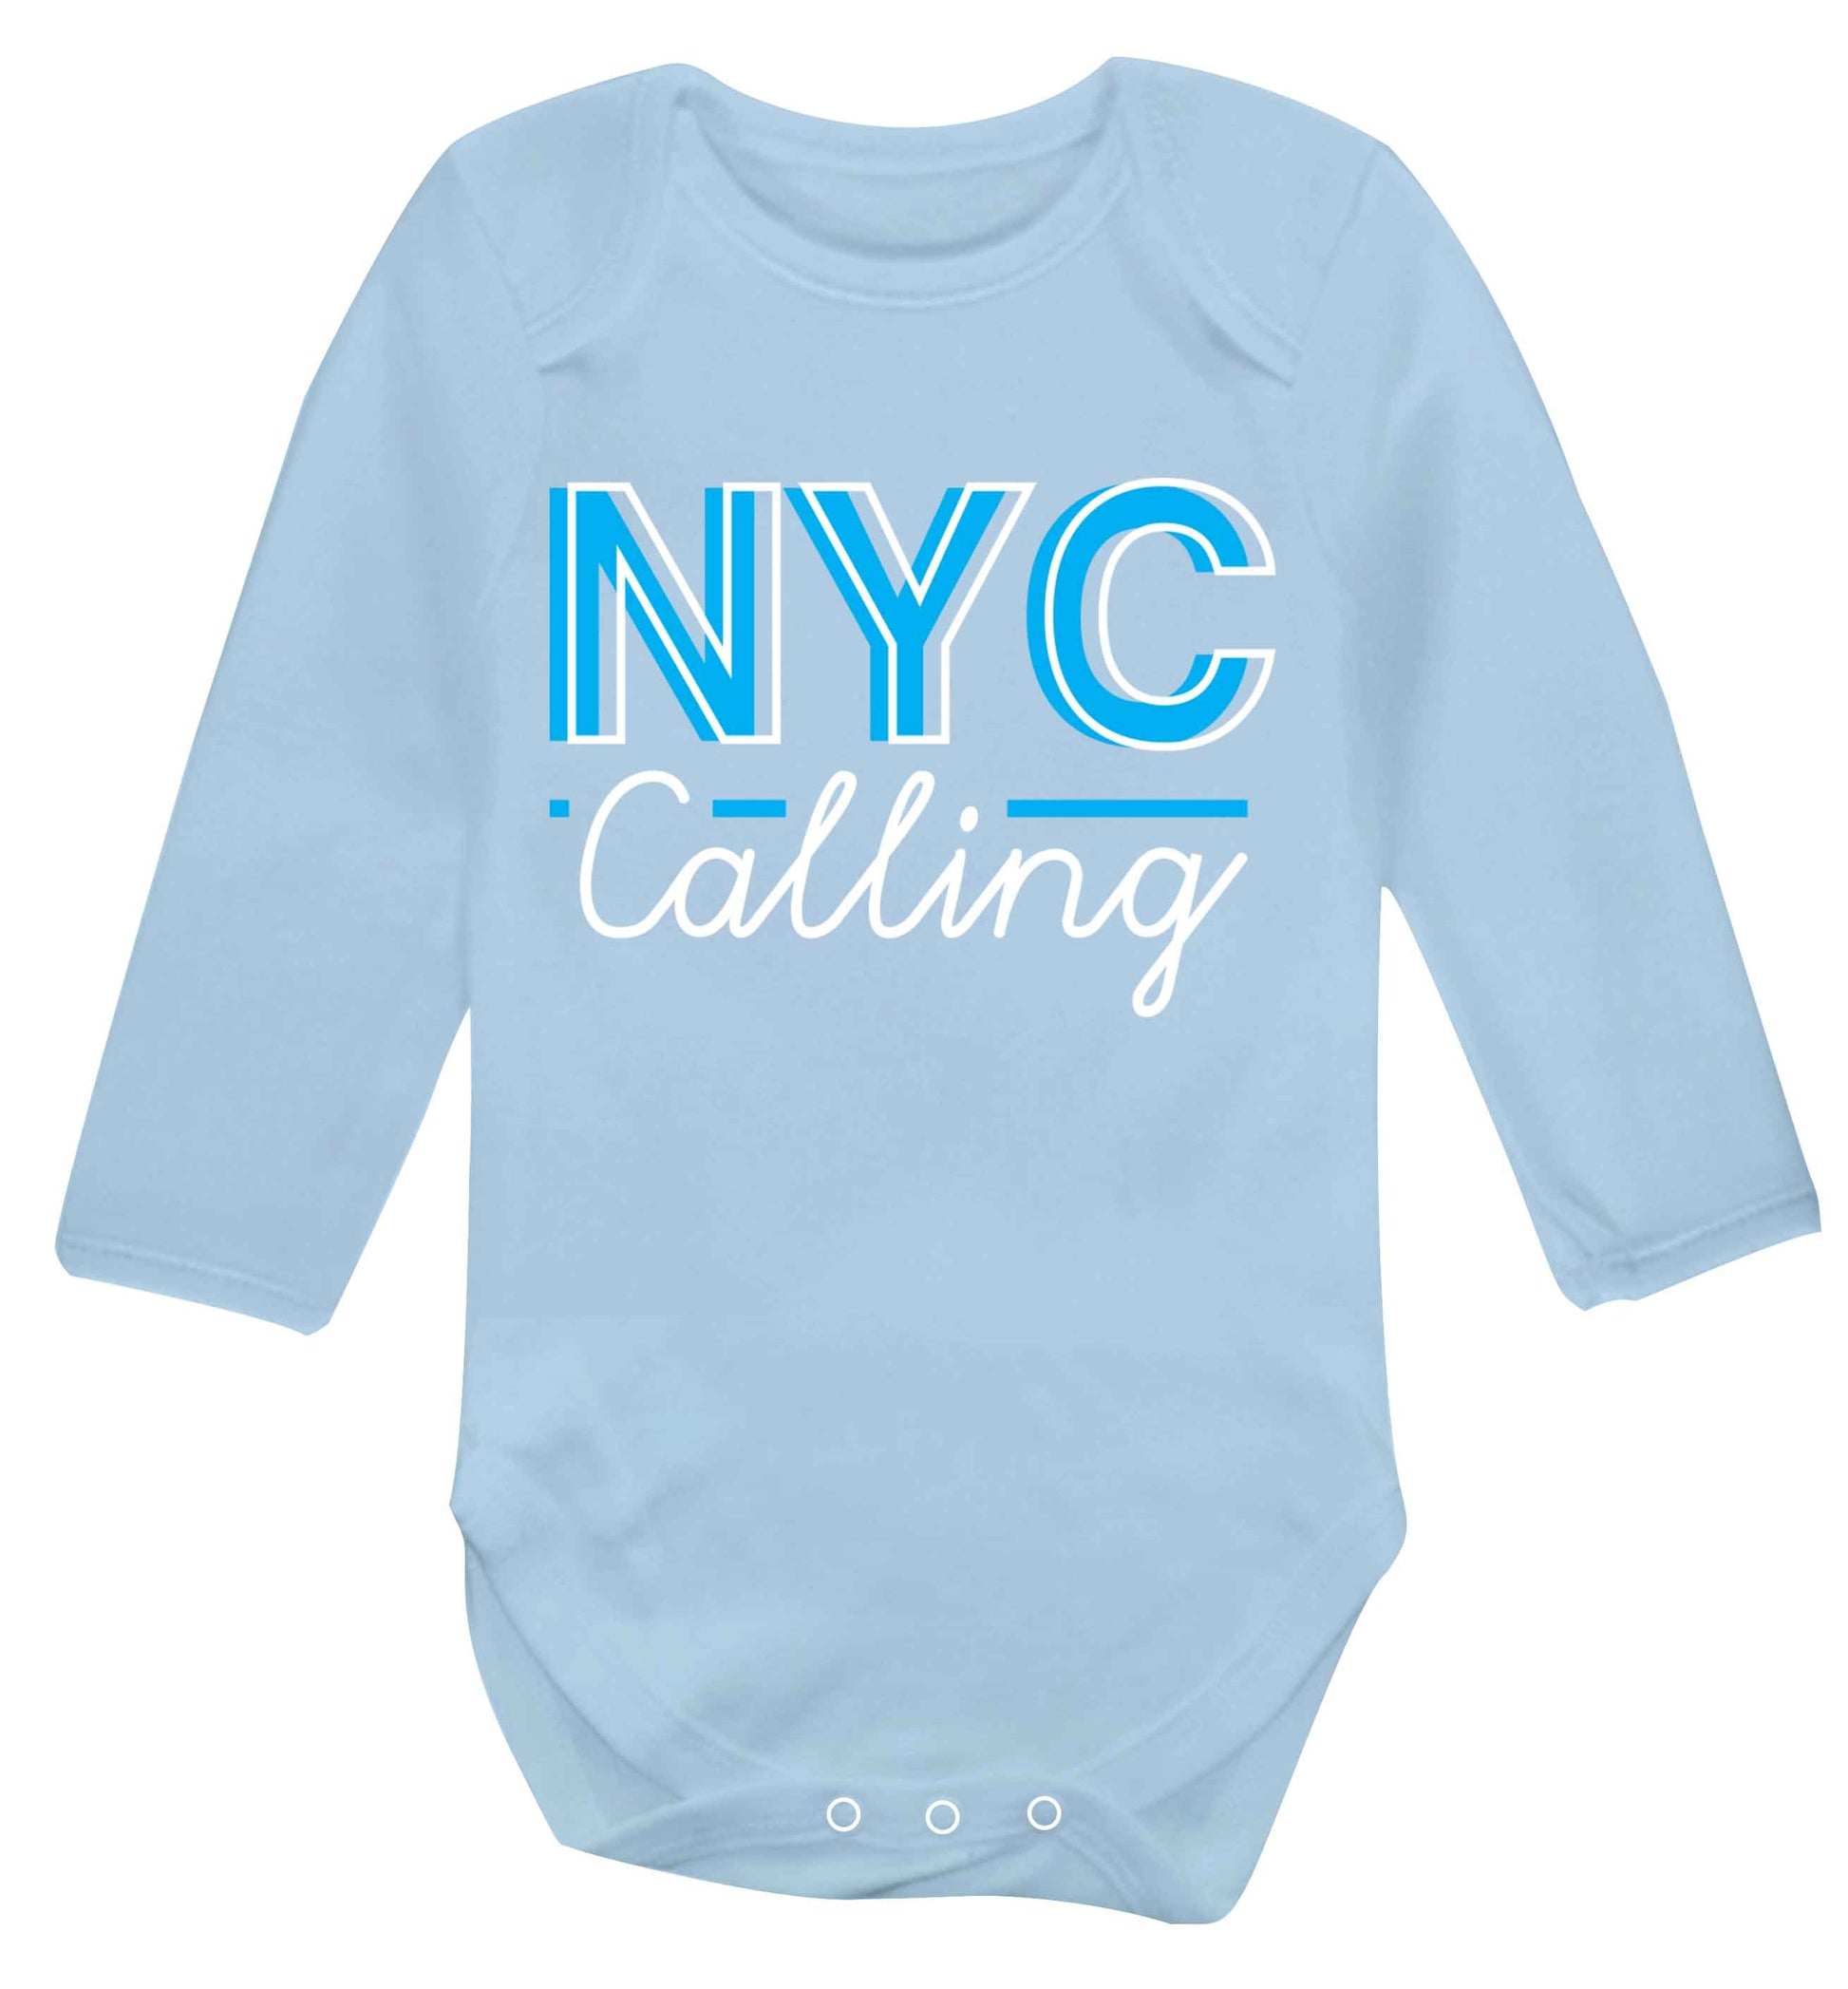 NYC calling Baby Vest long sleeved pale blue 6-12 months